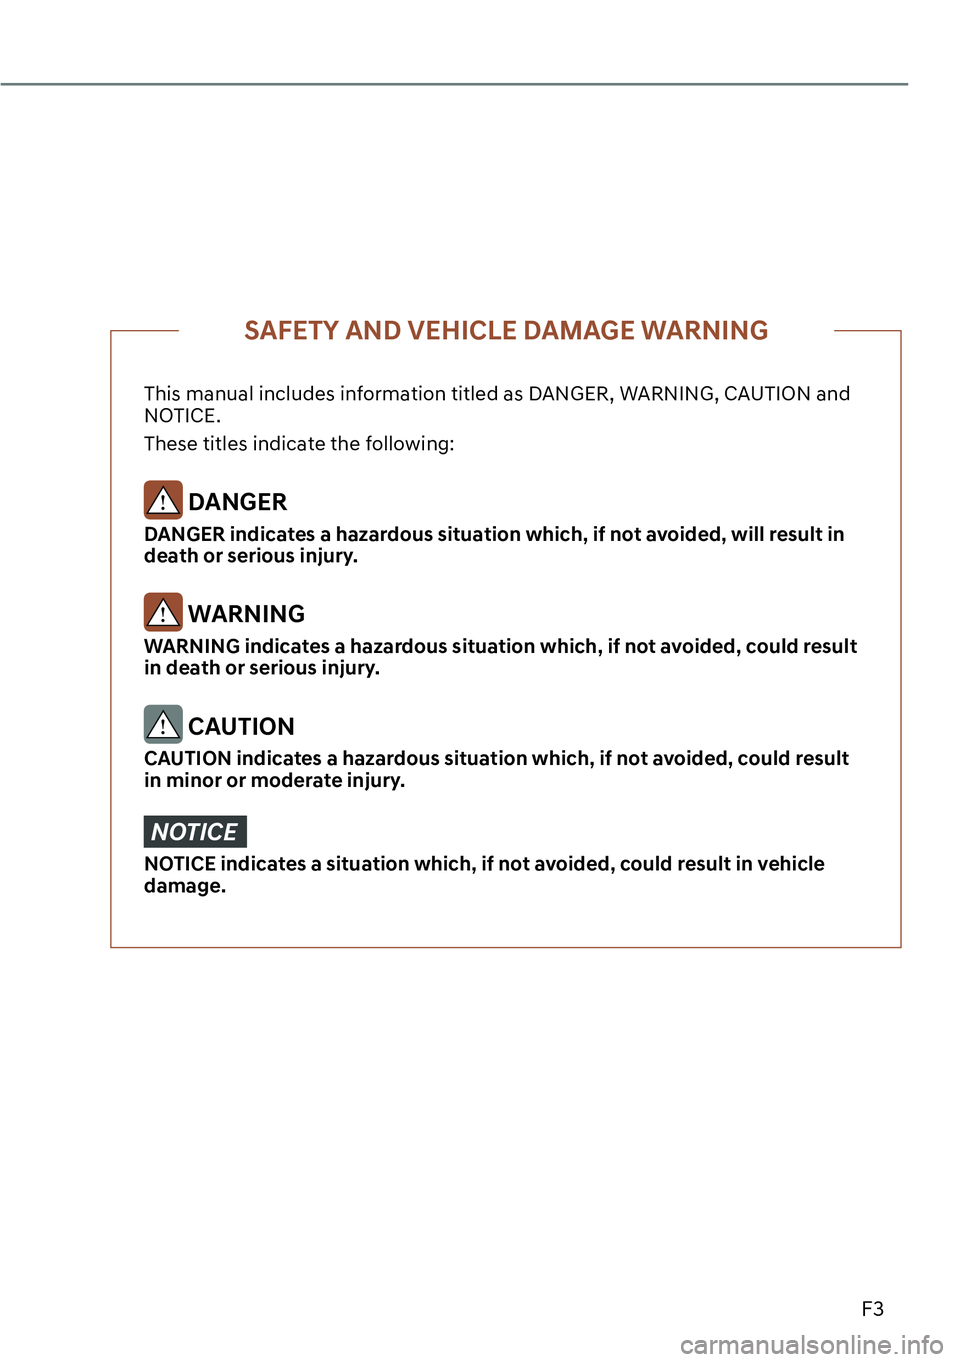 GENESIS GV60 2023  Owners Manual F3
This manual includes information titled as DANGER, WARNING, CAUTION and 
NOTICE.
These titles indicate the following:
 DANGER
DANGER indicates a hazardous situation which, if not avoided, will resu